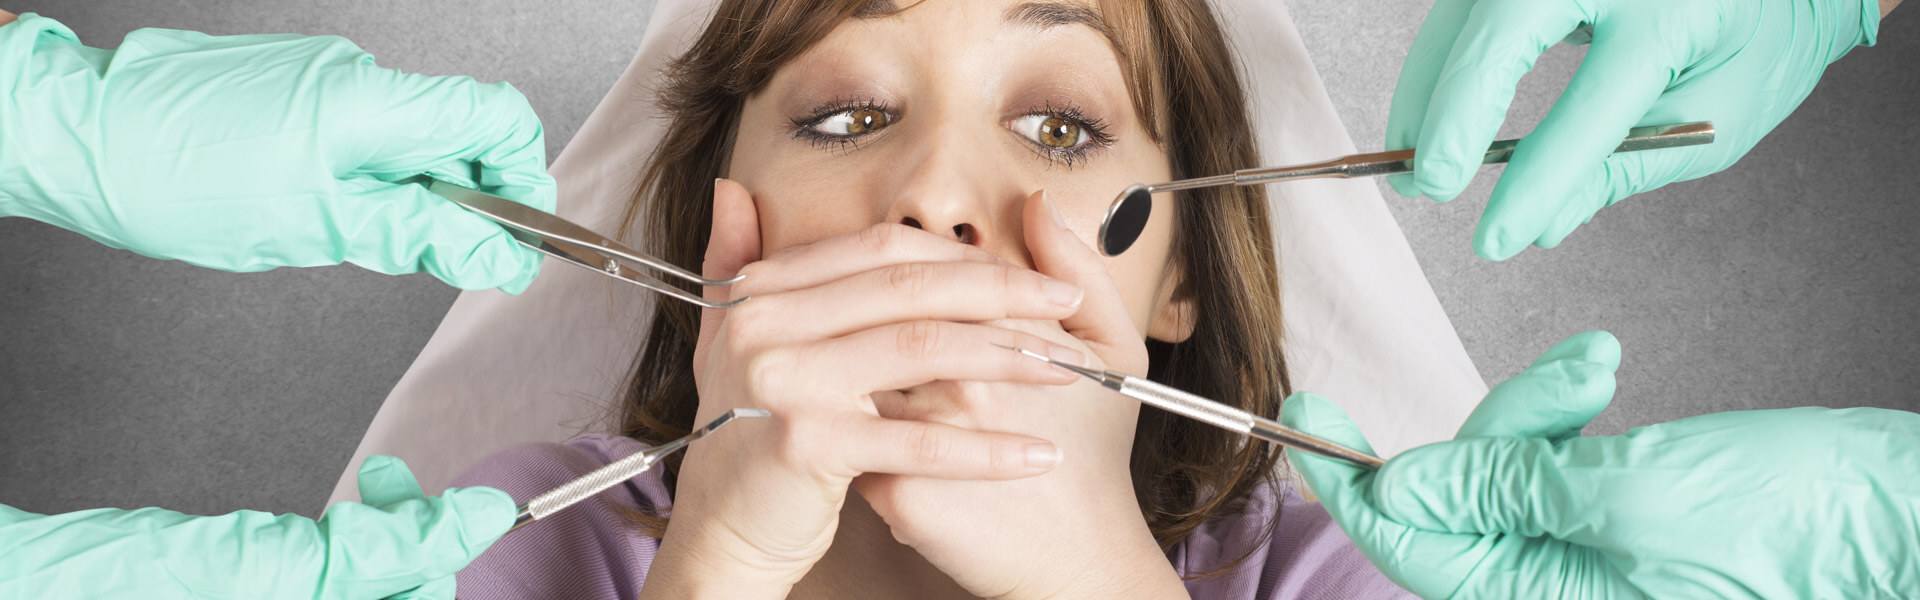 Needle Phobia: Fear of Injections and What to Do